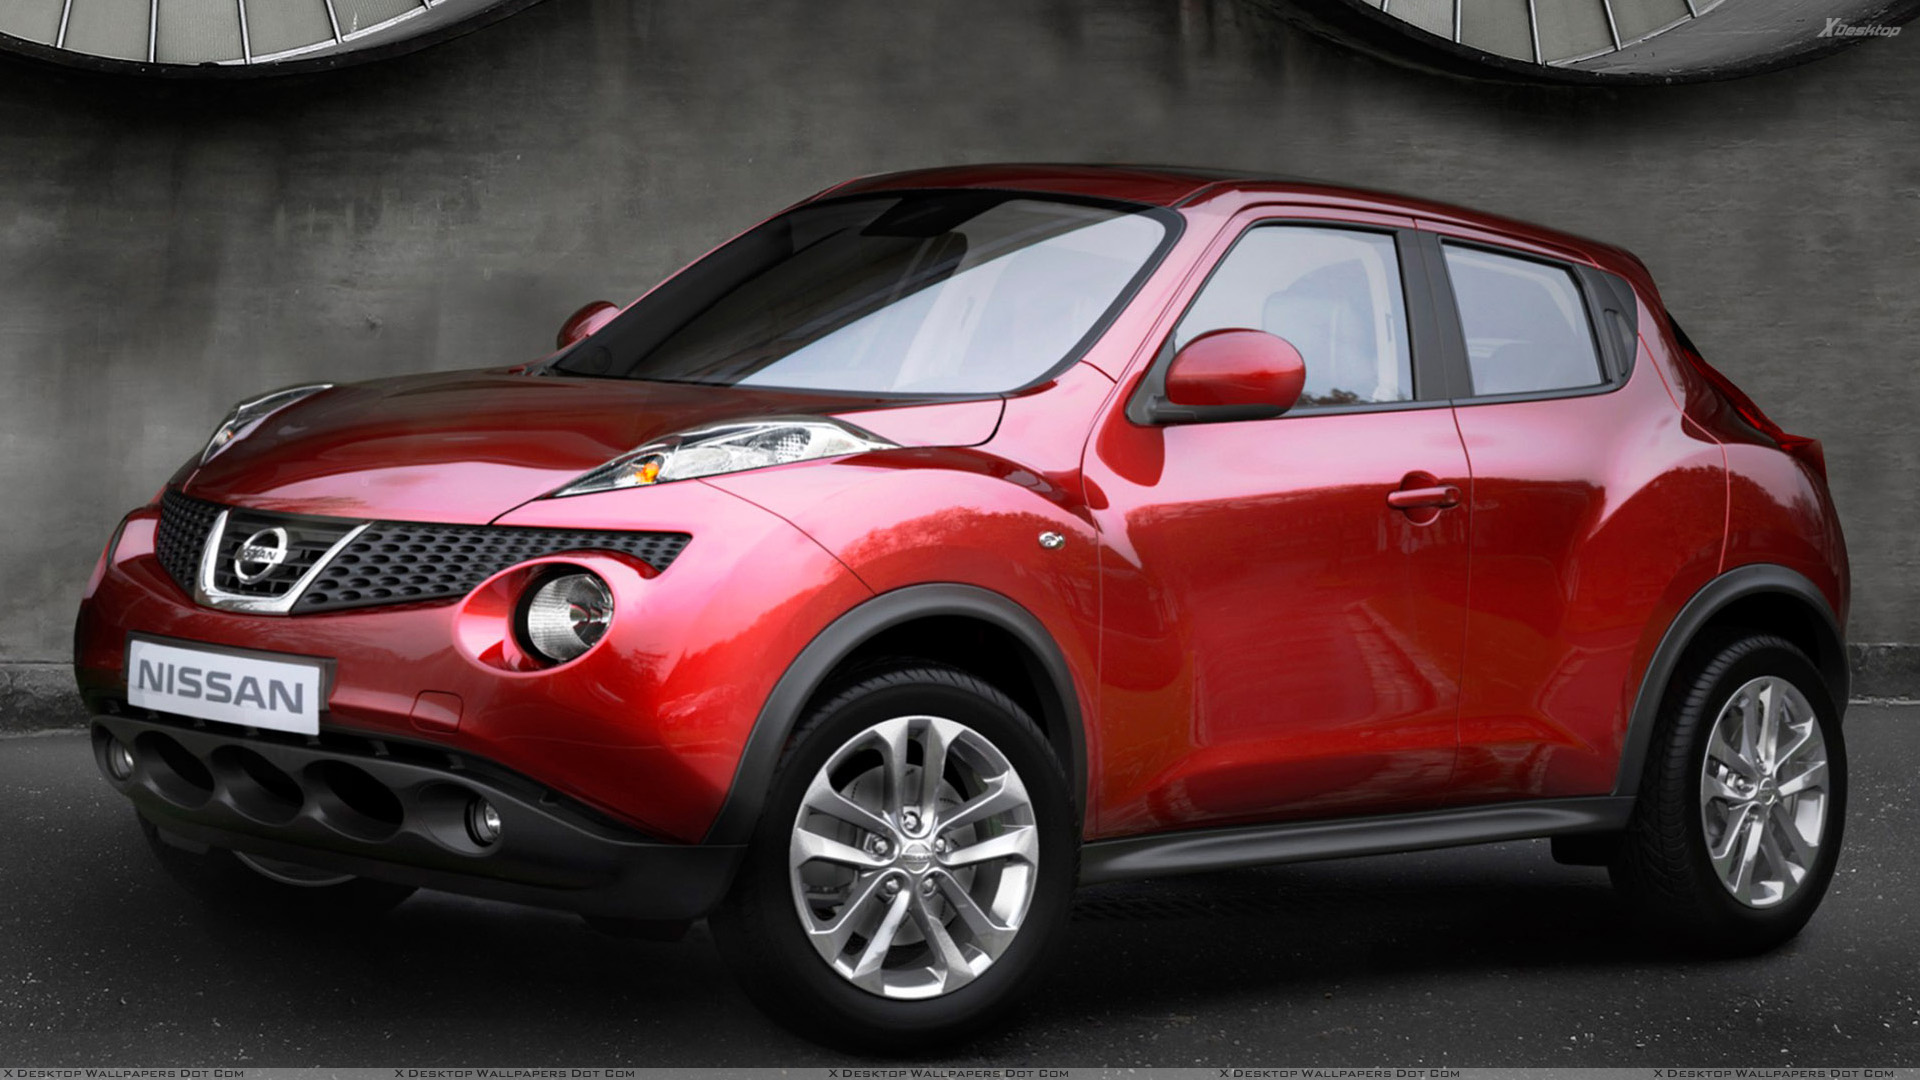 Nissan Juke 2008: Review, Amazing Pictures and Images ...